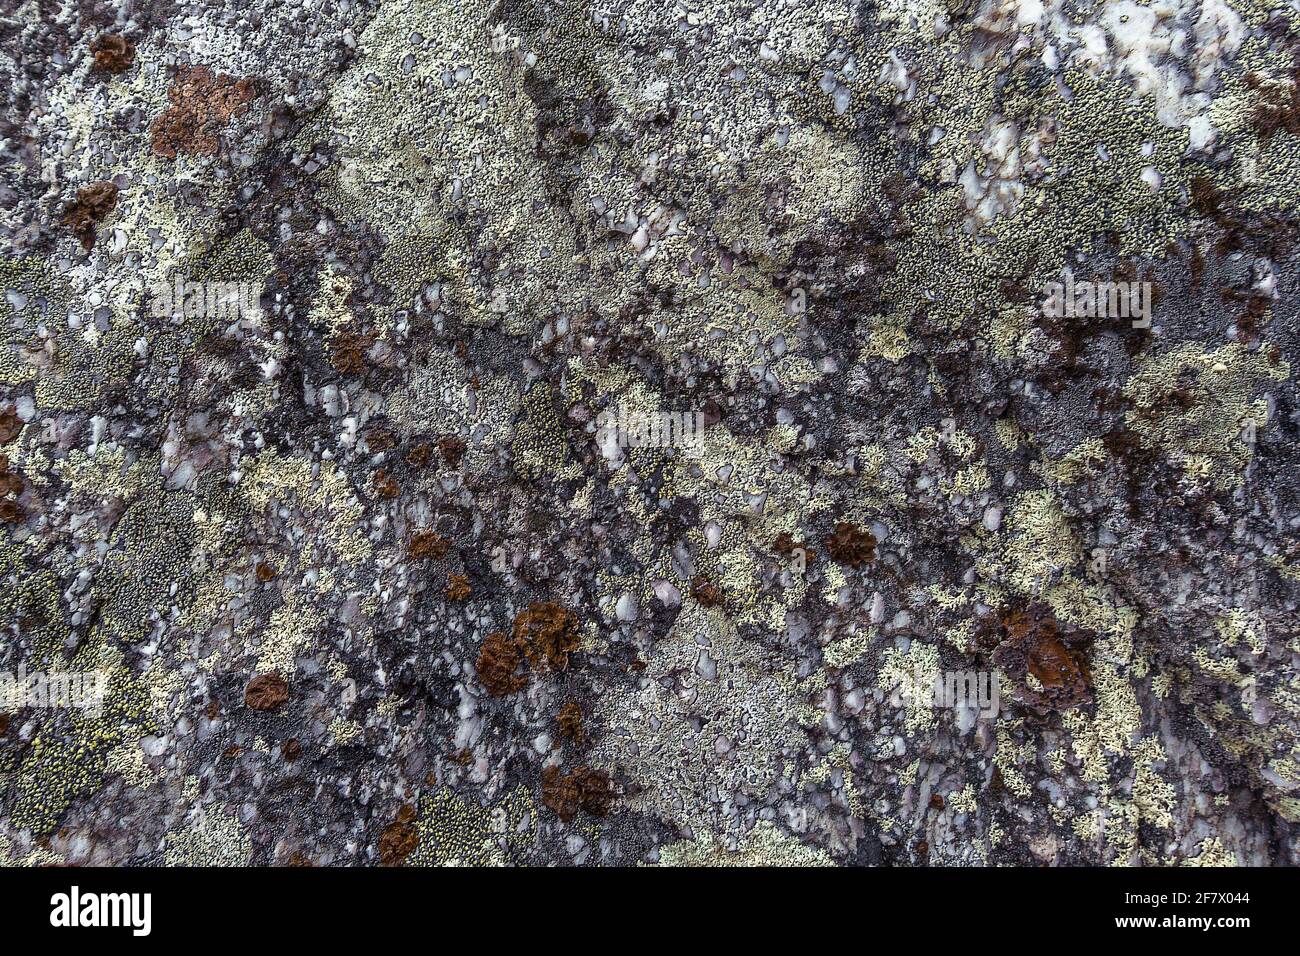 lichen on a rocks a camo style background. Natural moss texture Stock Photo  - Alamy